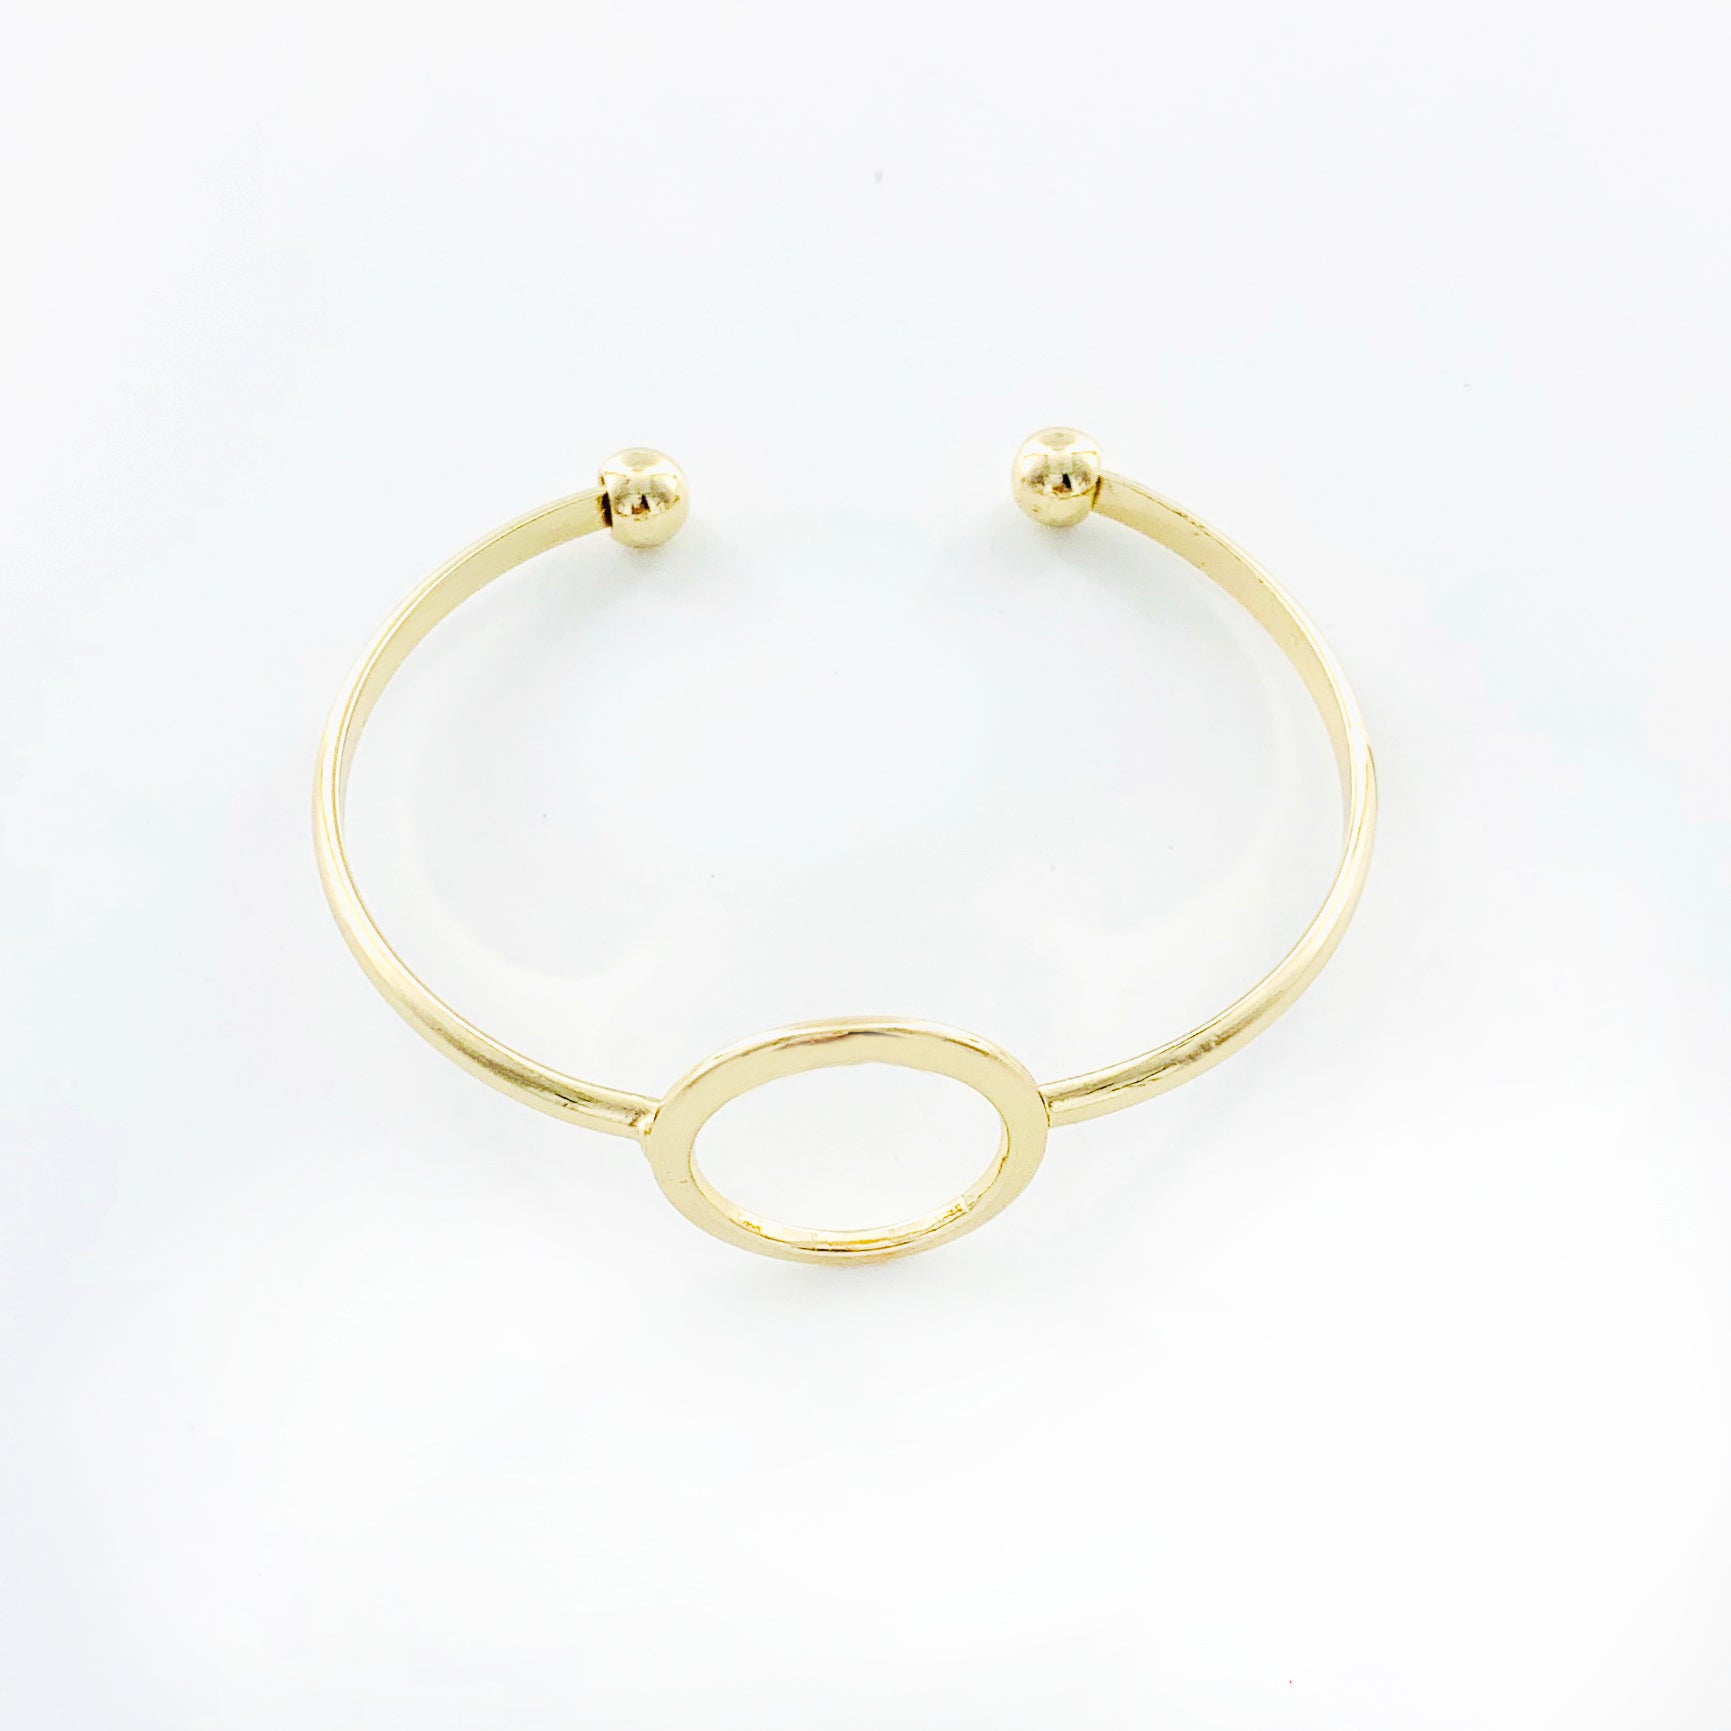 Thin gold bangles with hollow circle design